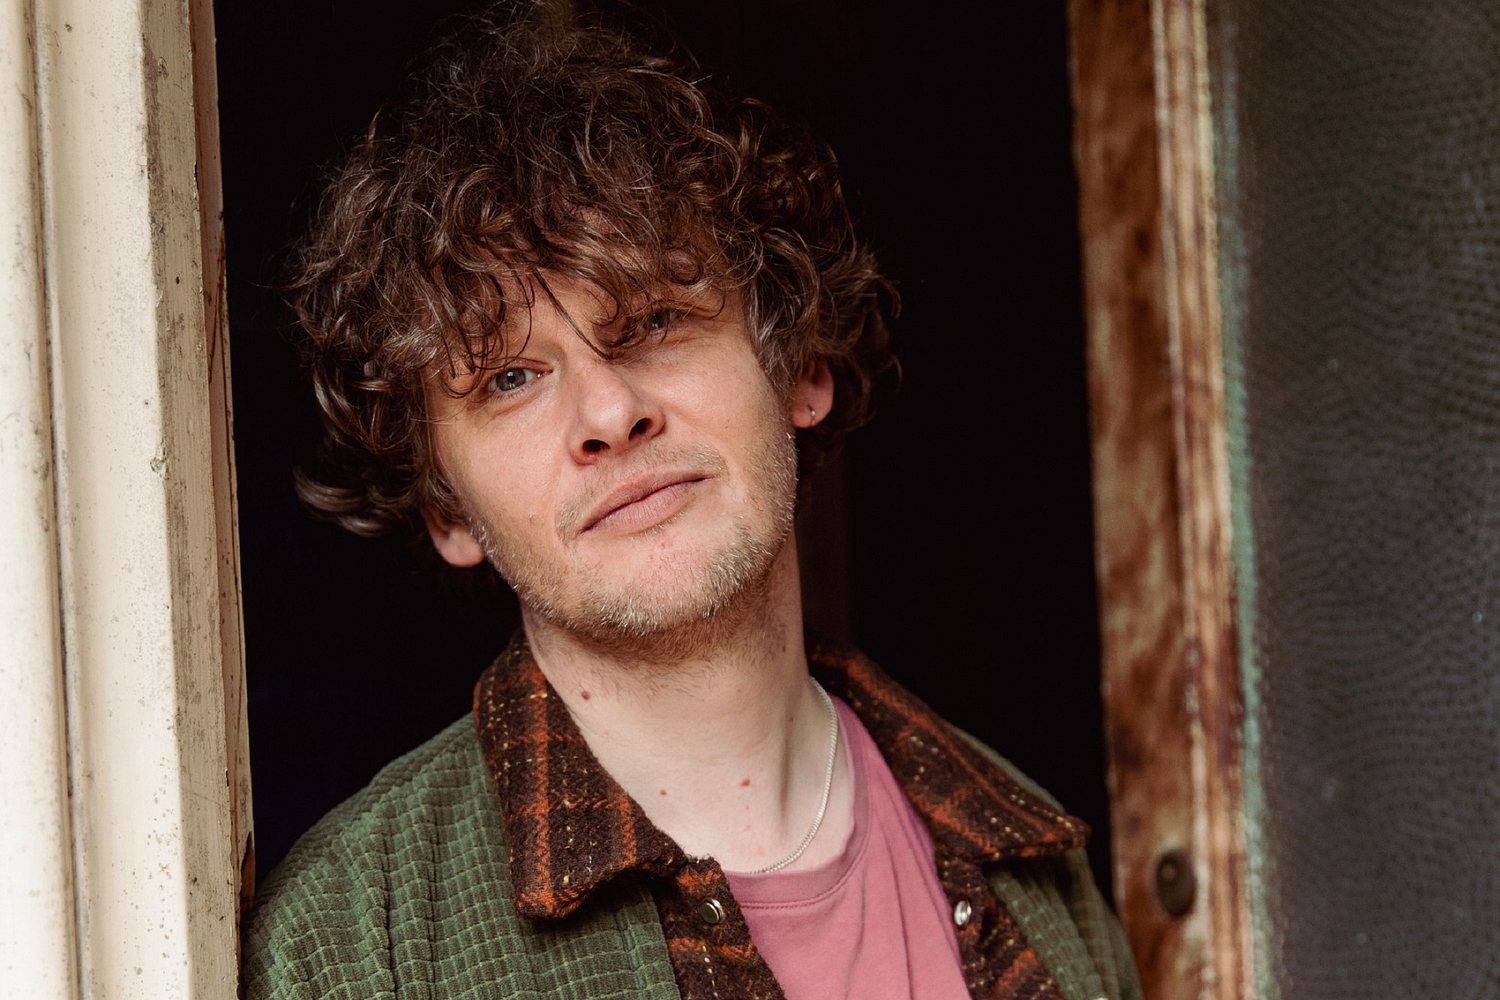 Bill Ryder-Jones offers up new single ‘If Tomorrow Starts Without Me’